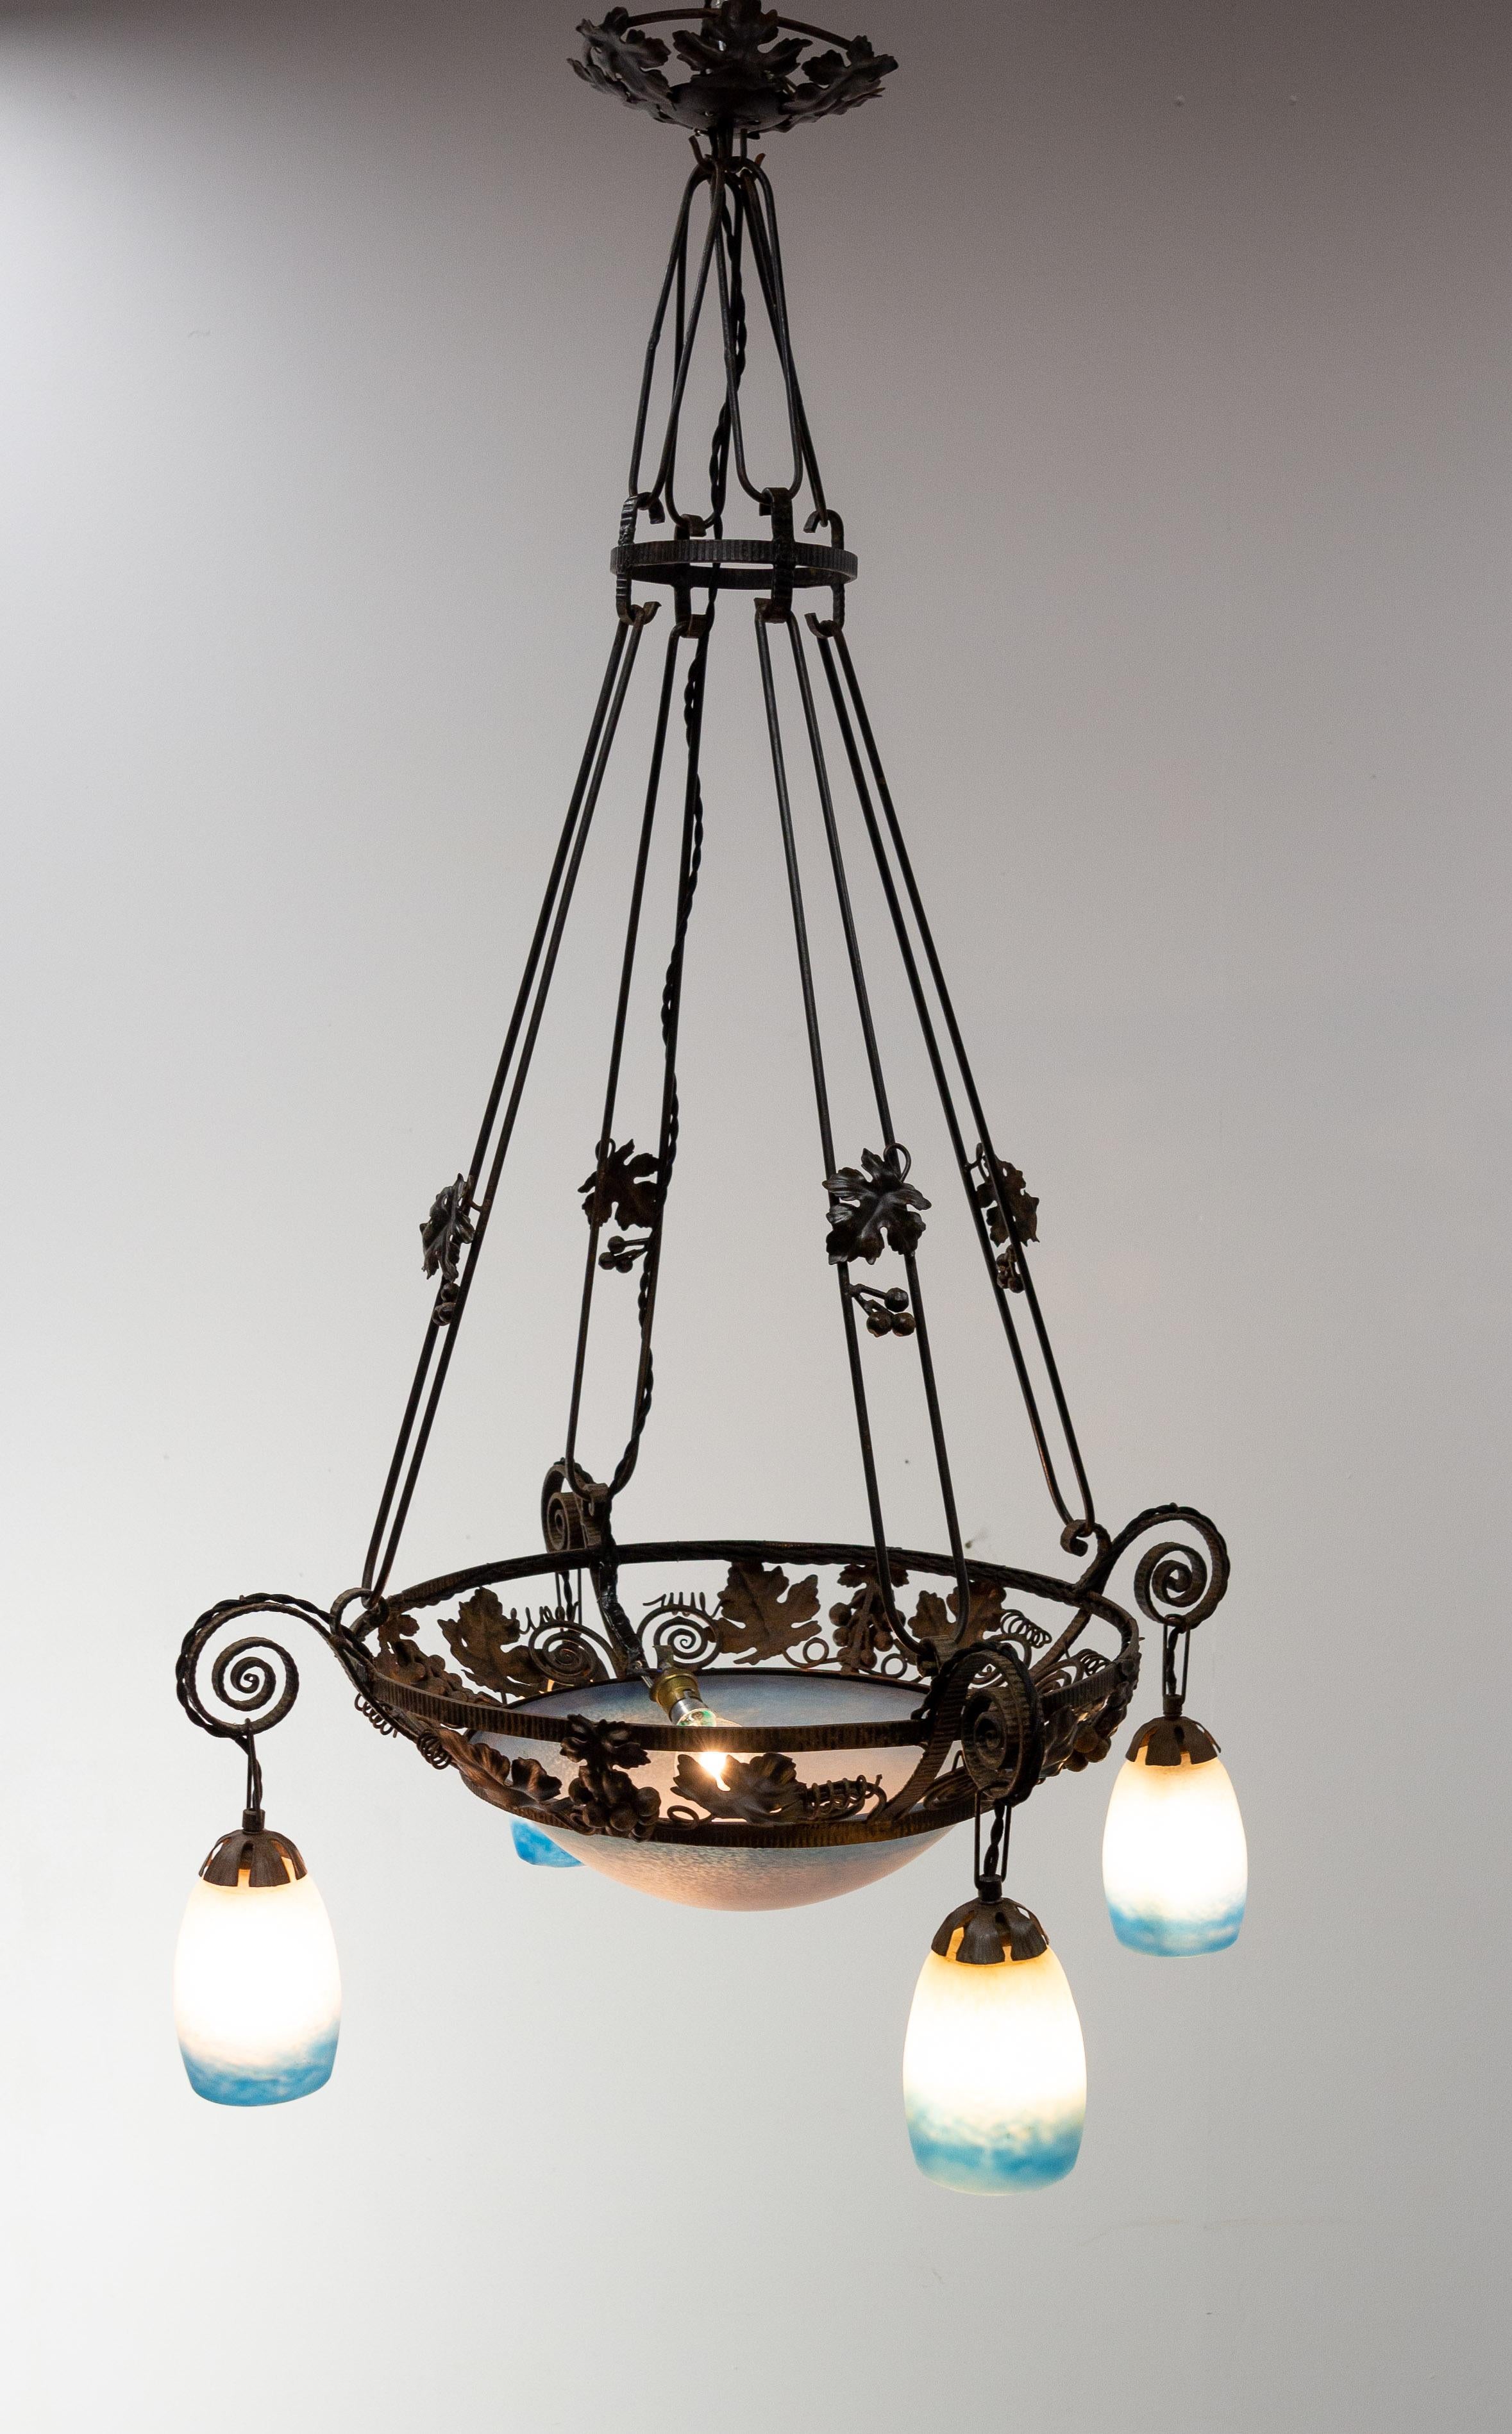 Art Glass French Art Deco Chandelier Colored Glass & Wrought Iron Ceiling Pendant, C 1930 For Sale